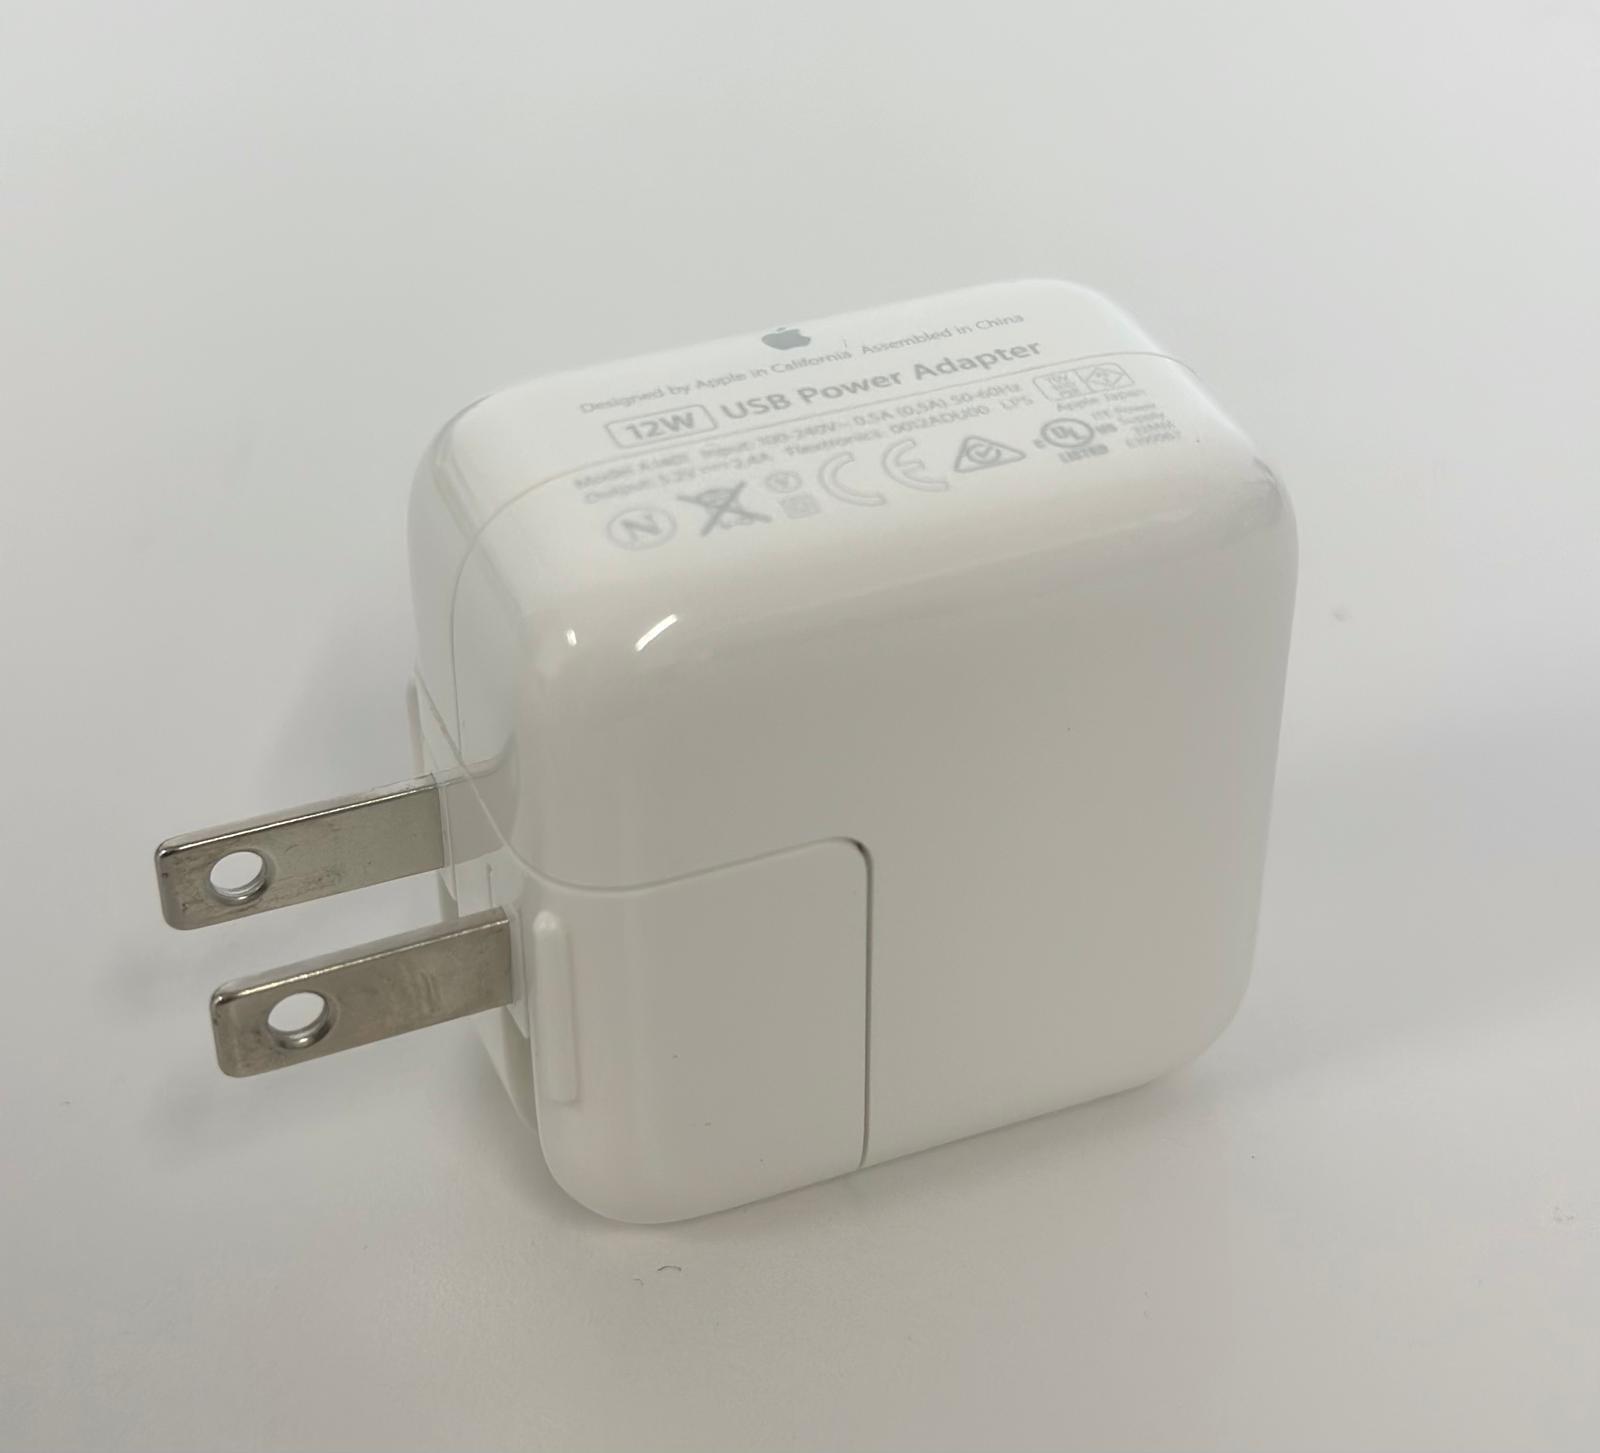 Genuine OEM Apple 12W USB Power Adapter Type A Wall Charger for iPhone & iPad